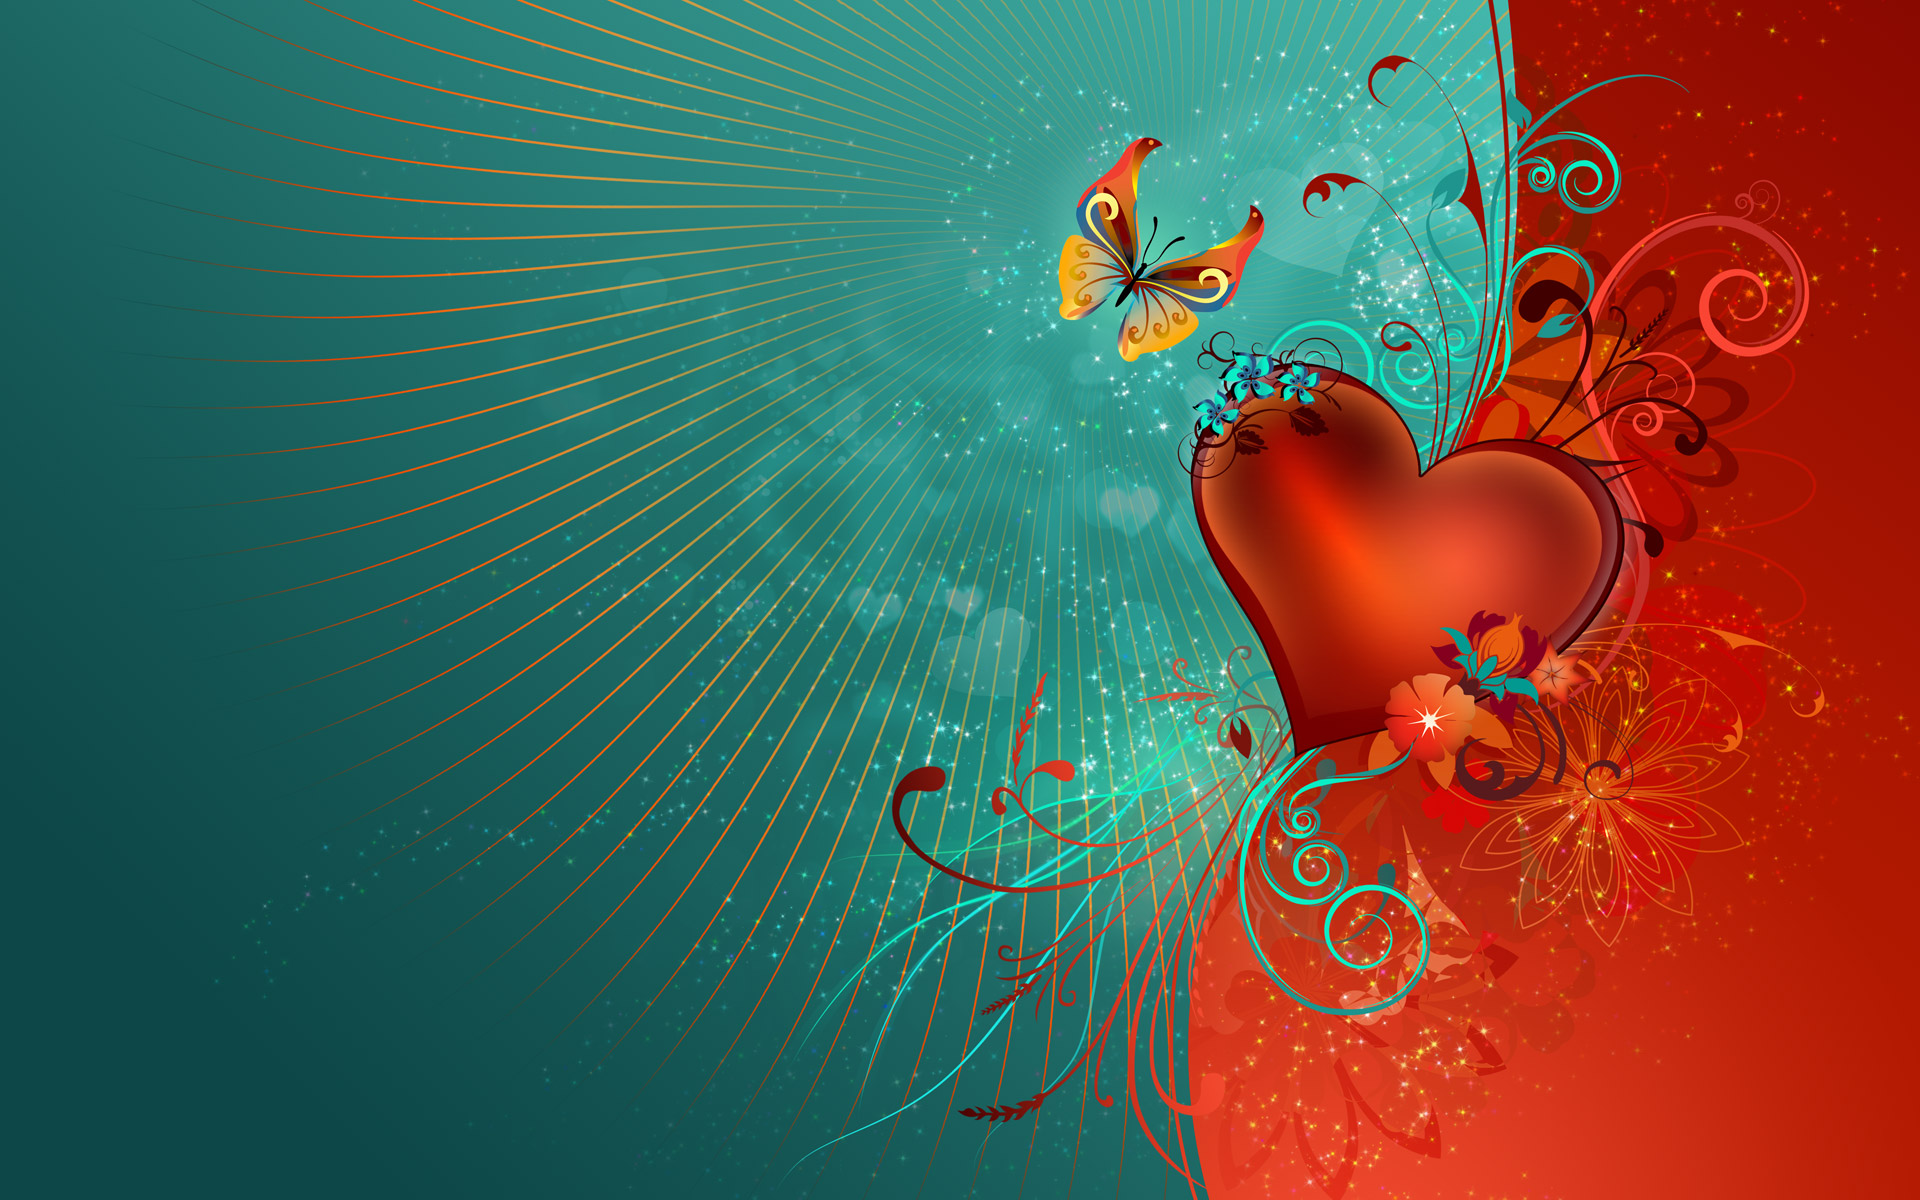 1080p wallpapers,blue,red,heart,turquoise,graphic design